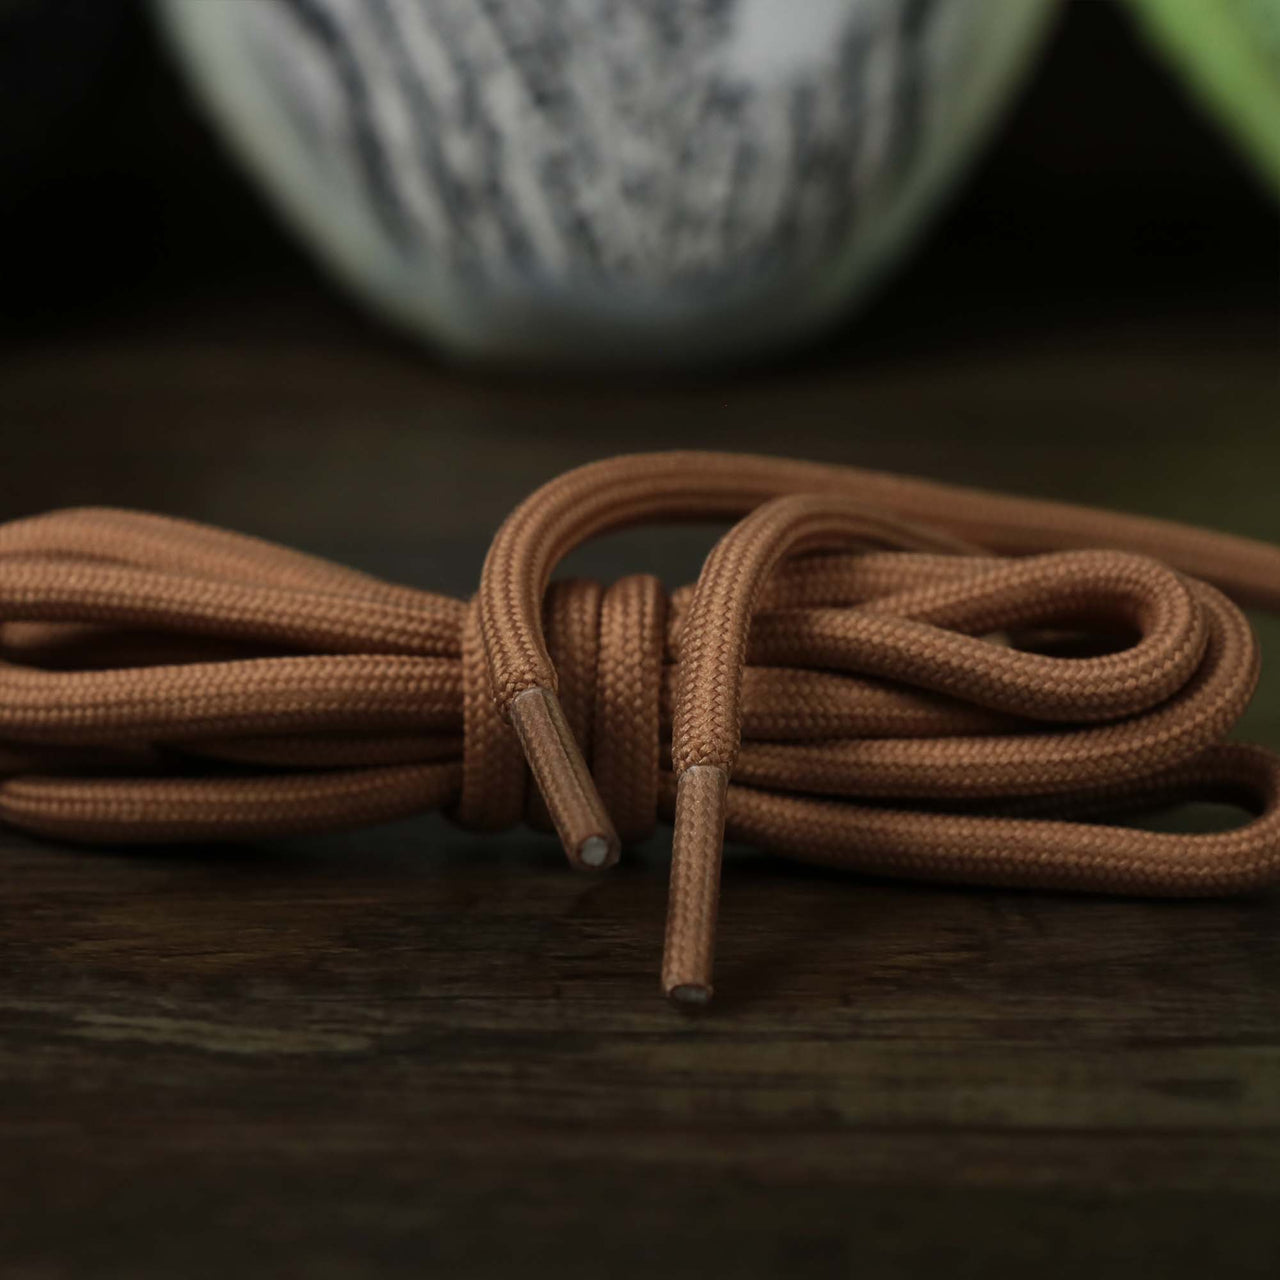 The Solid Rope Old Gold Shoelaces with Old Gold Aglets | 120cm Capswag